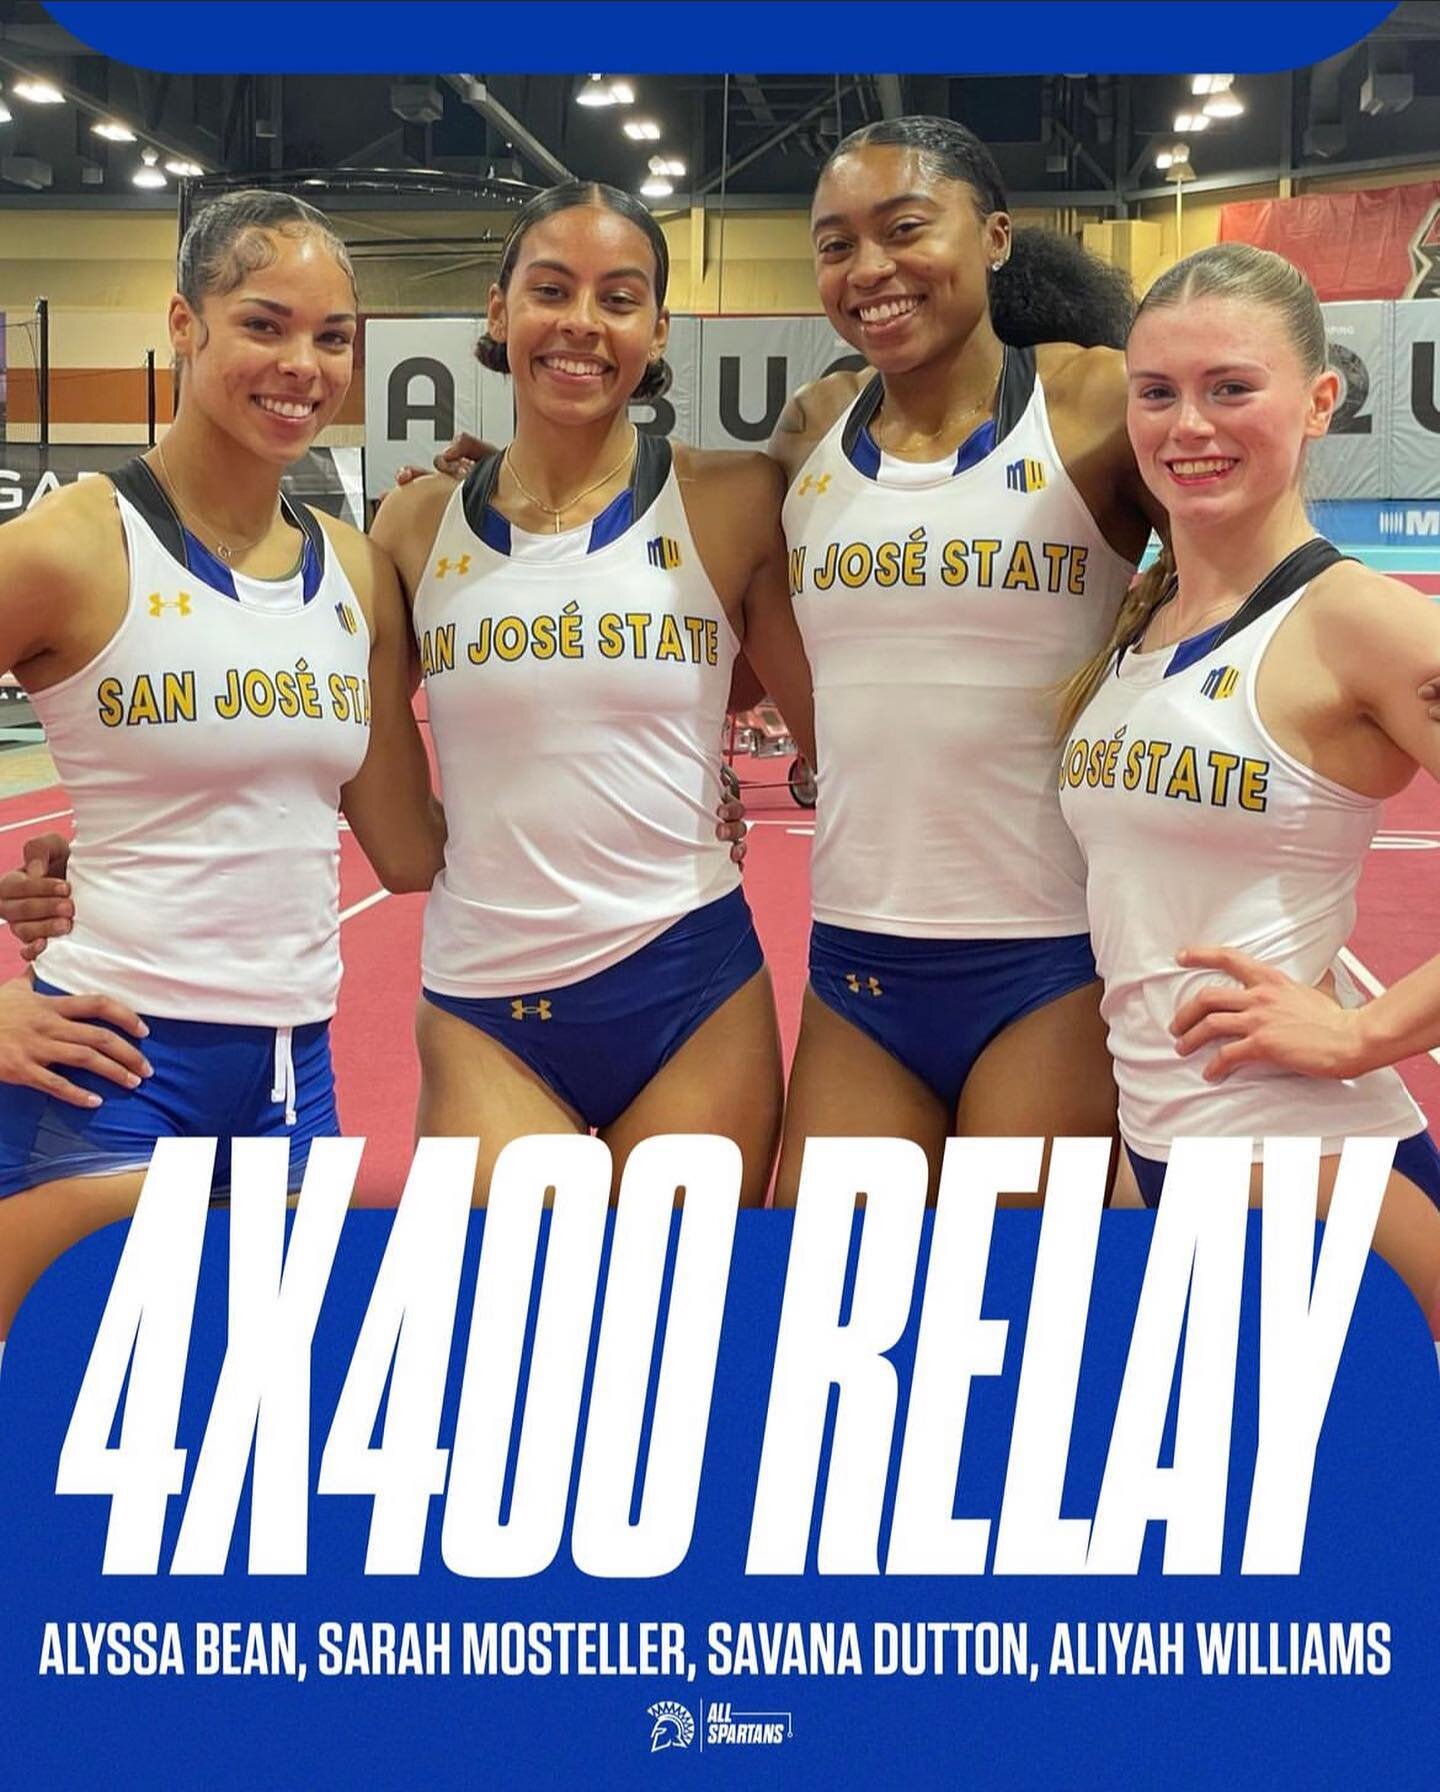 Congrats to our track and field athletes who broke records recently! Wish them luck as they compete at the Don Kirby Invitational this weekend in Albuquerque! 

#AllSpartans